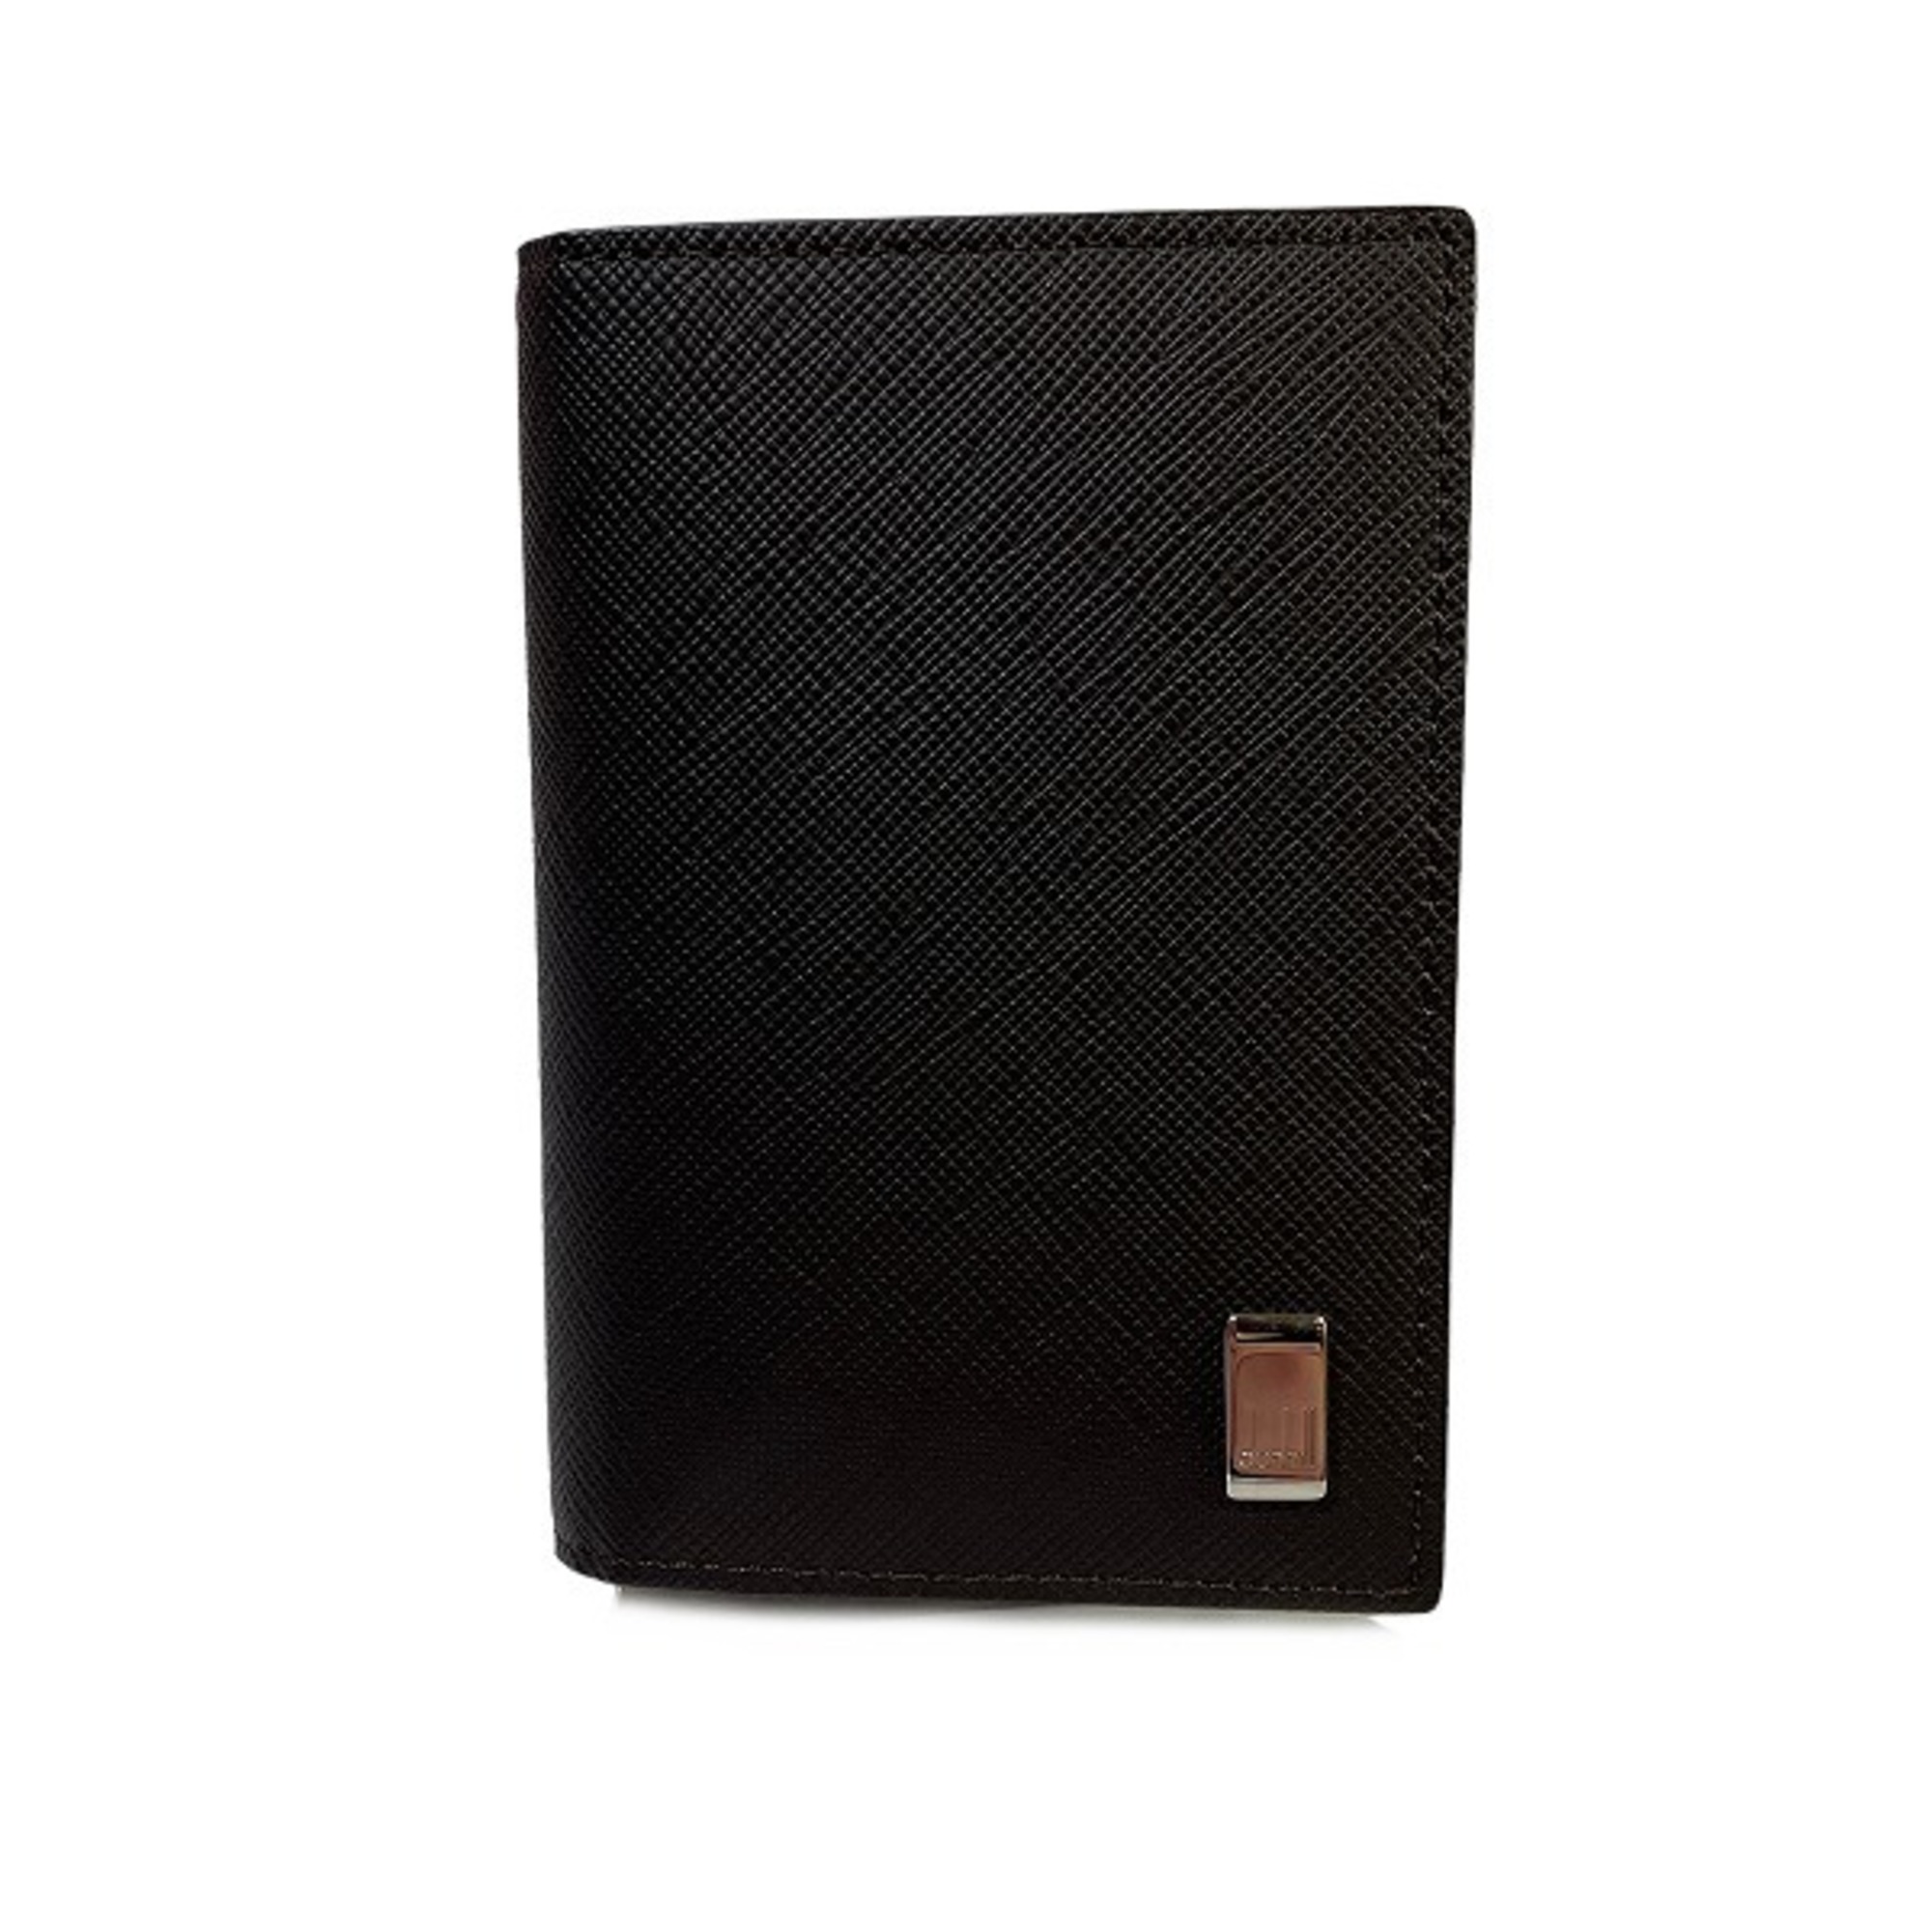 Dunhill accessories, pass cases, business card holders, men's and women's items